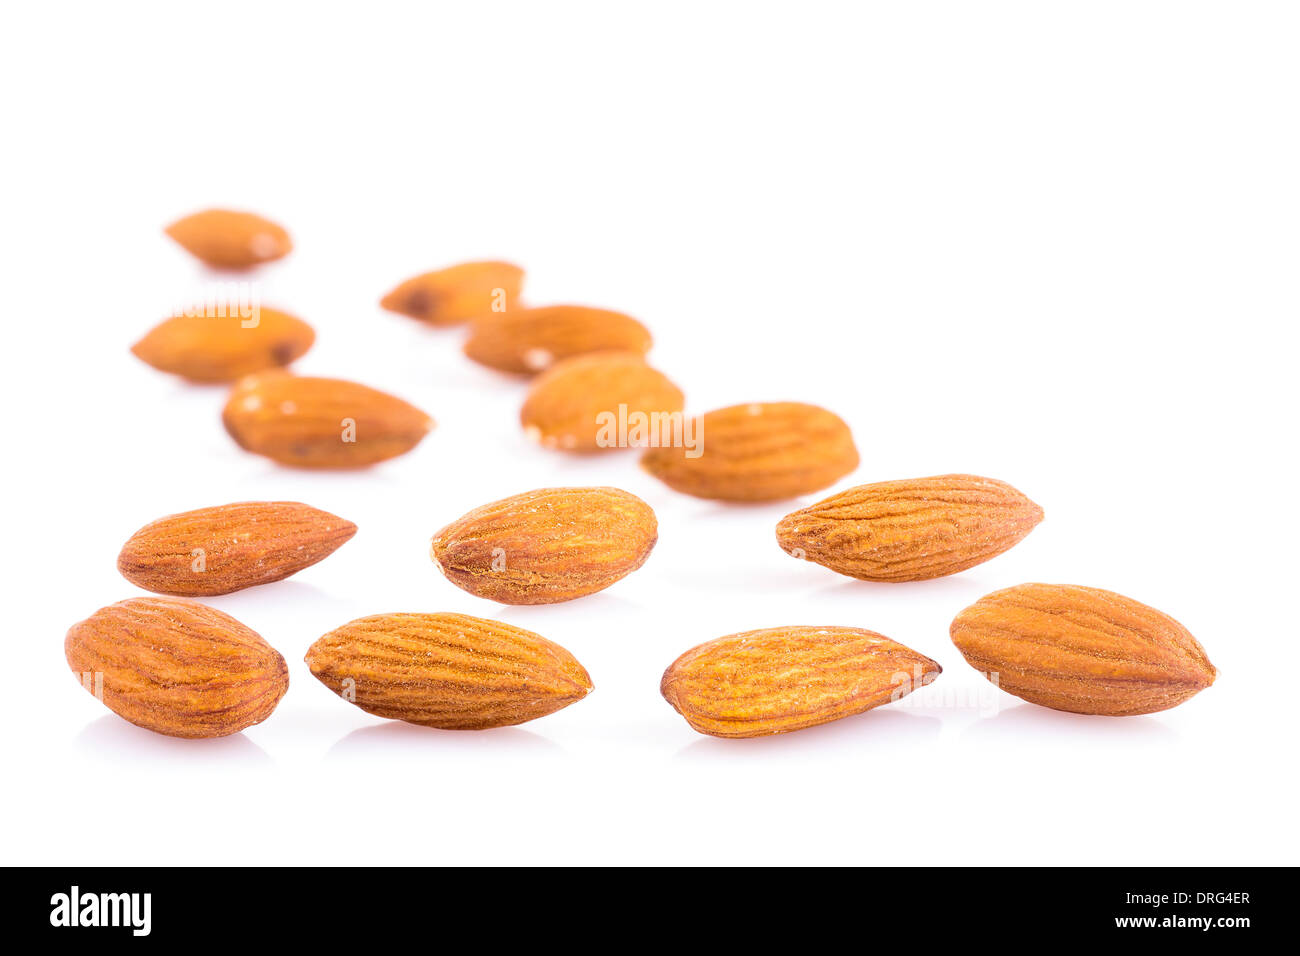 Group of almonds isolated on white Stock Photo